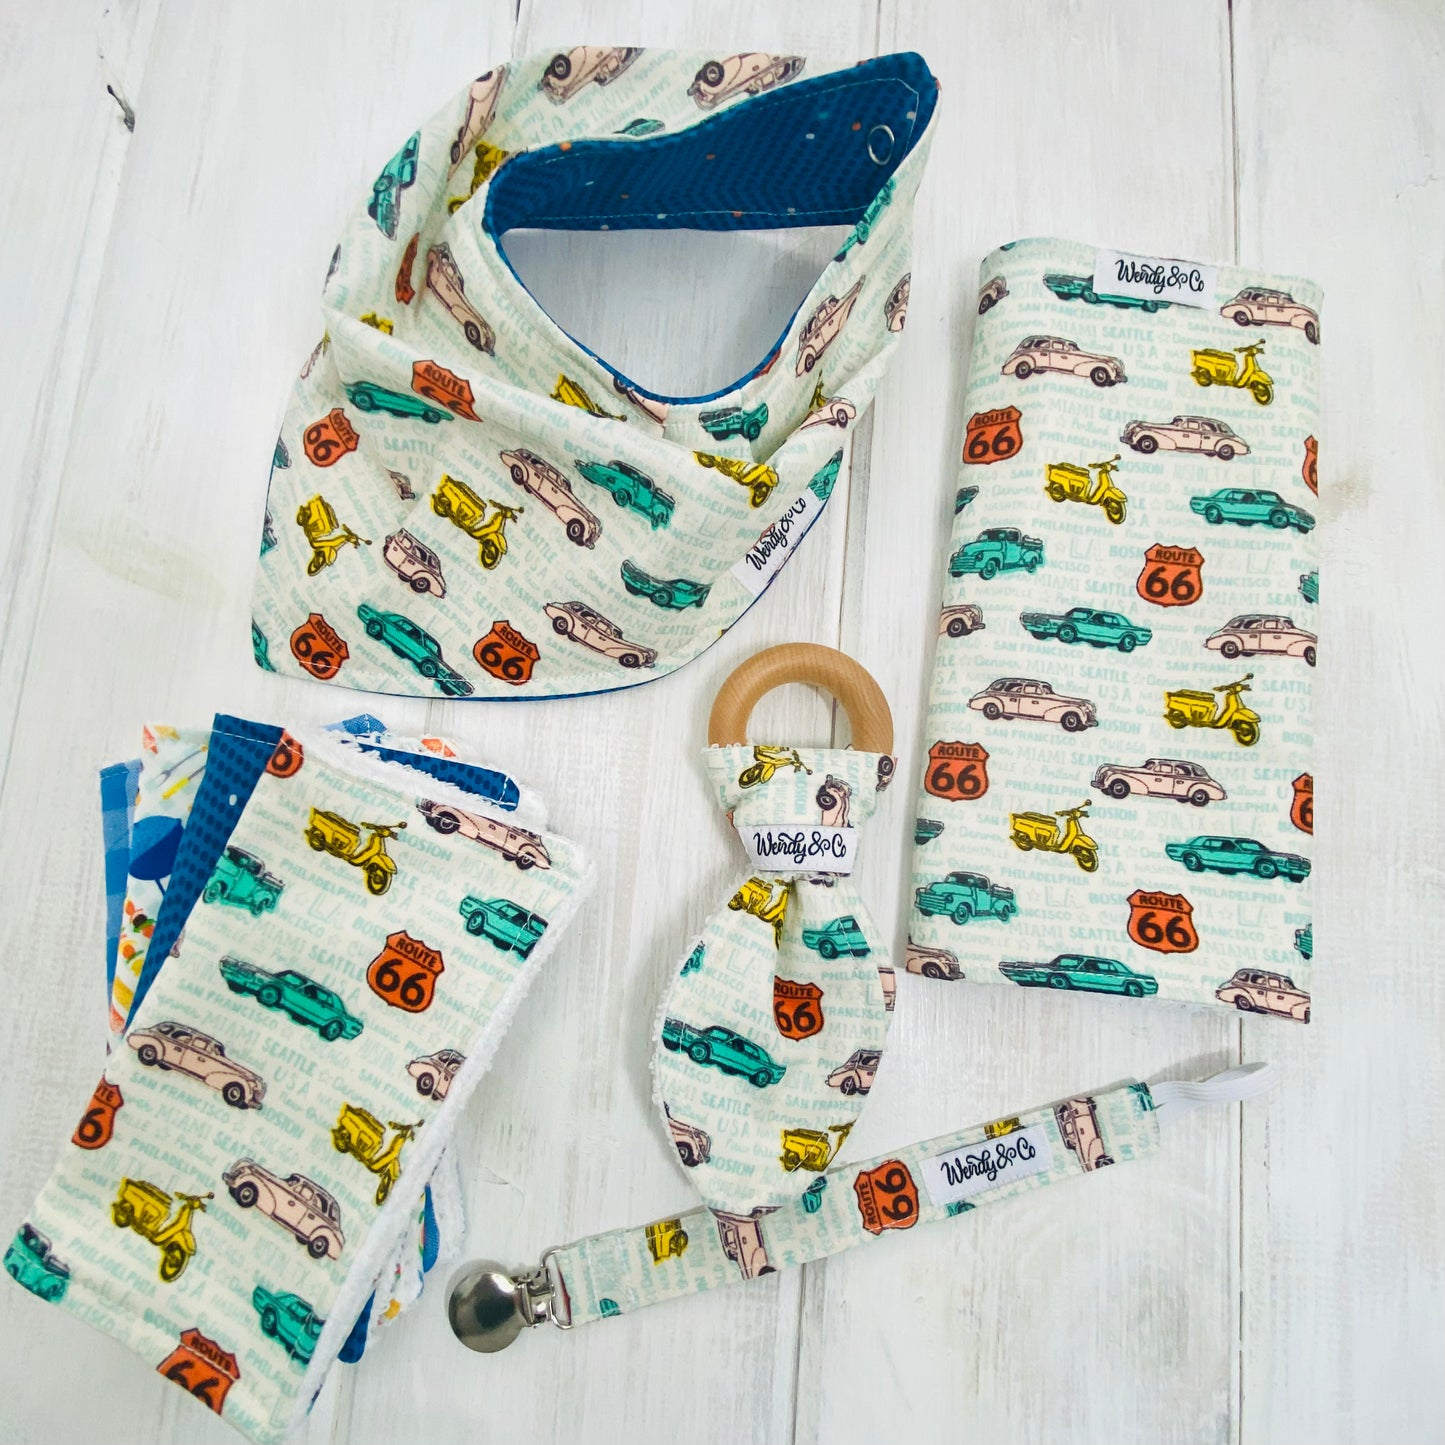 Baby boy gift set including burp cloth, washing cloths, paci clip, teether and reversible bandana bib, in Route 66 fabric.